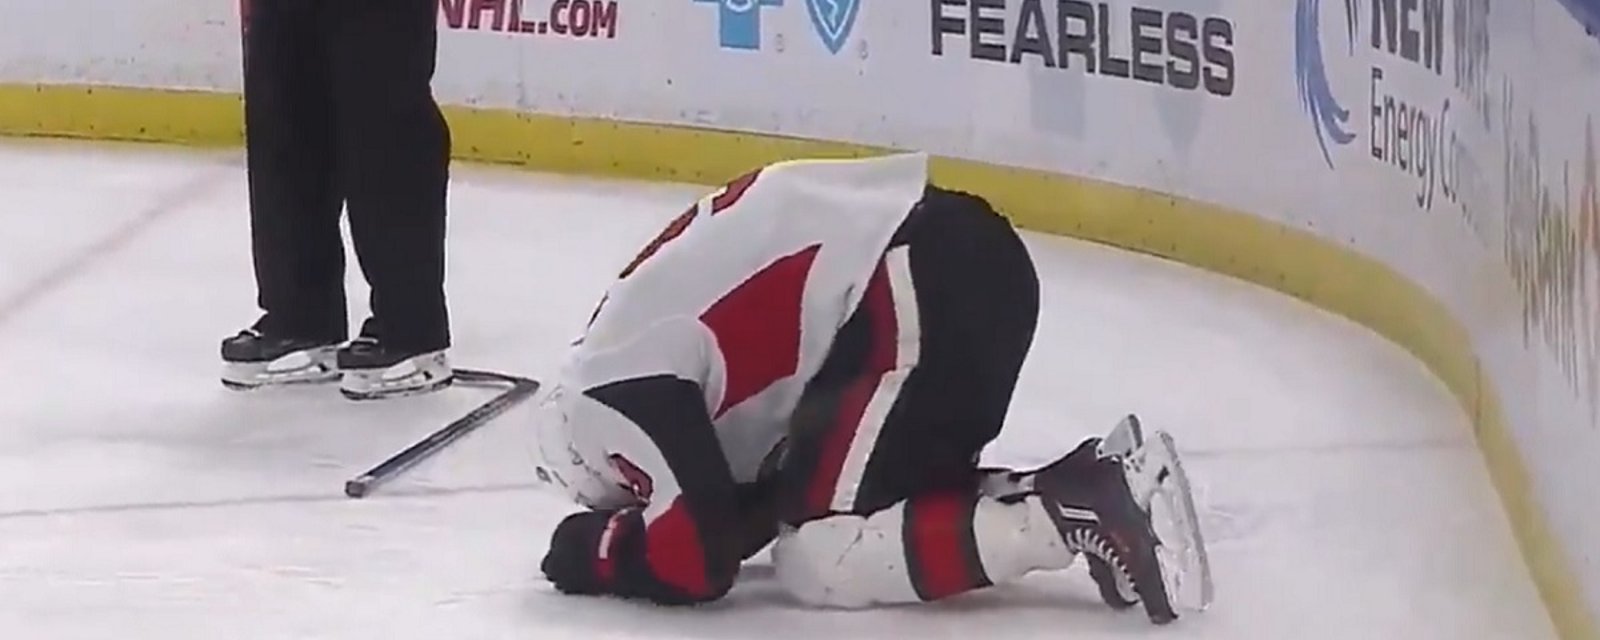 Breaking: Bobby Ryan gets crushed by a huge hit behind the net.